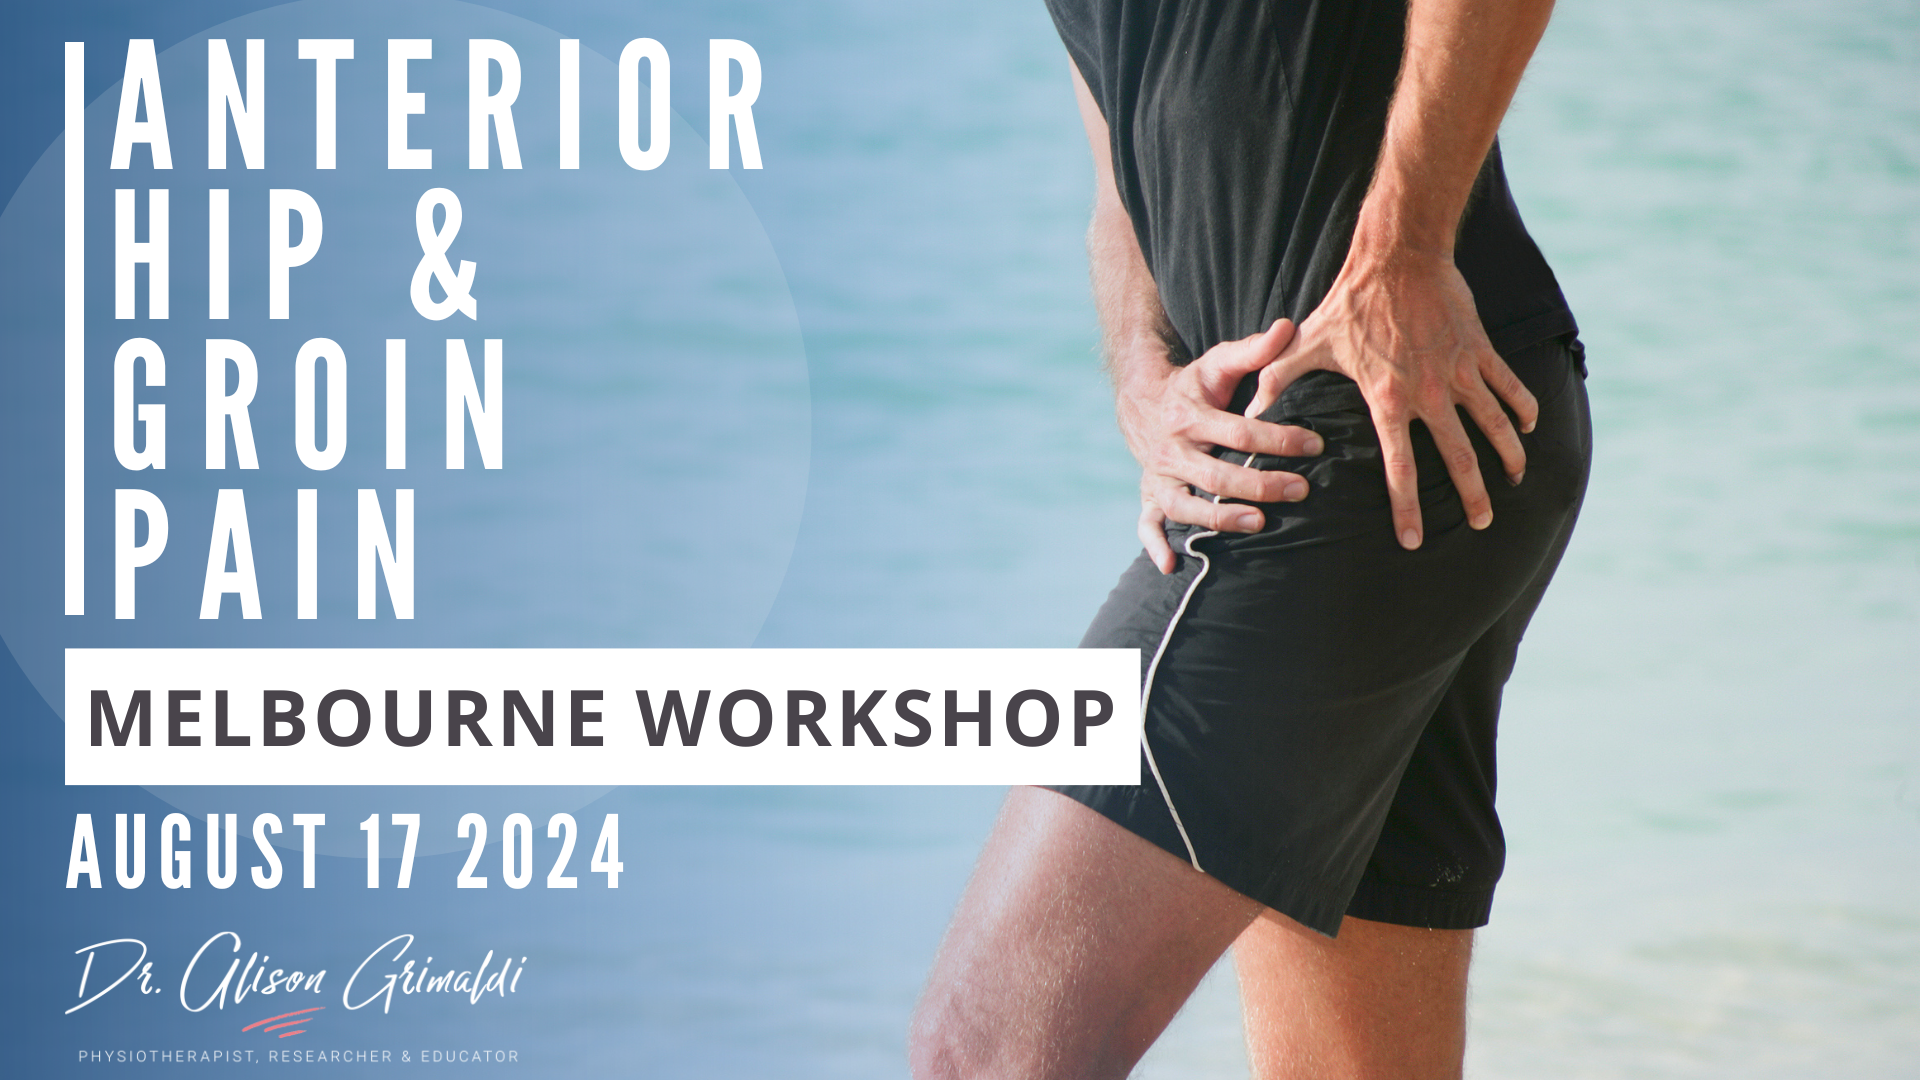 Anterior-Hip-and-Groin-Pain-Workshop-Melbourne-2024